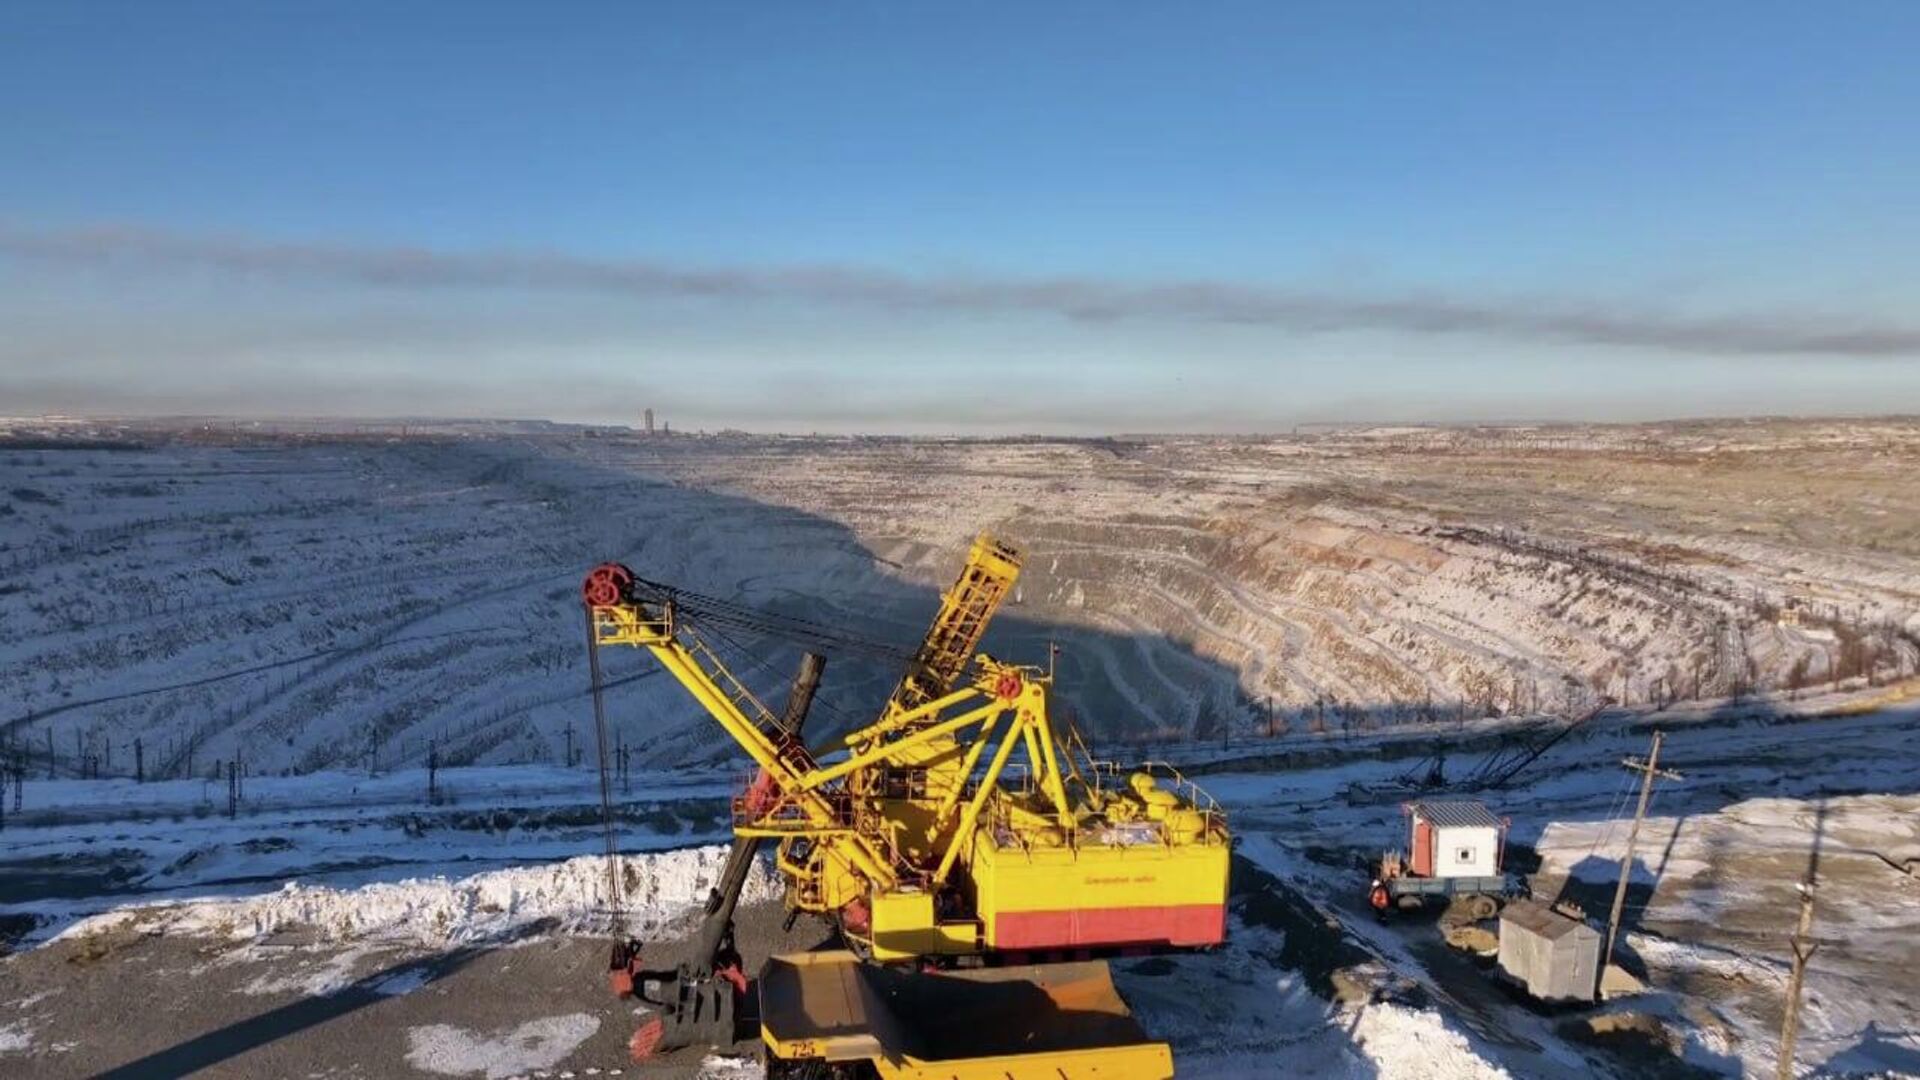 Will the mining sector of the Kostanay region go into processing?